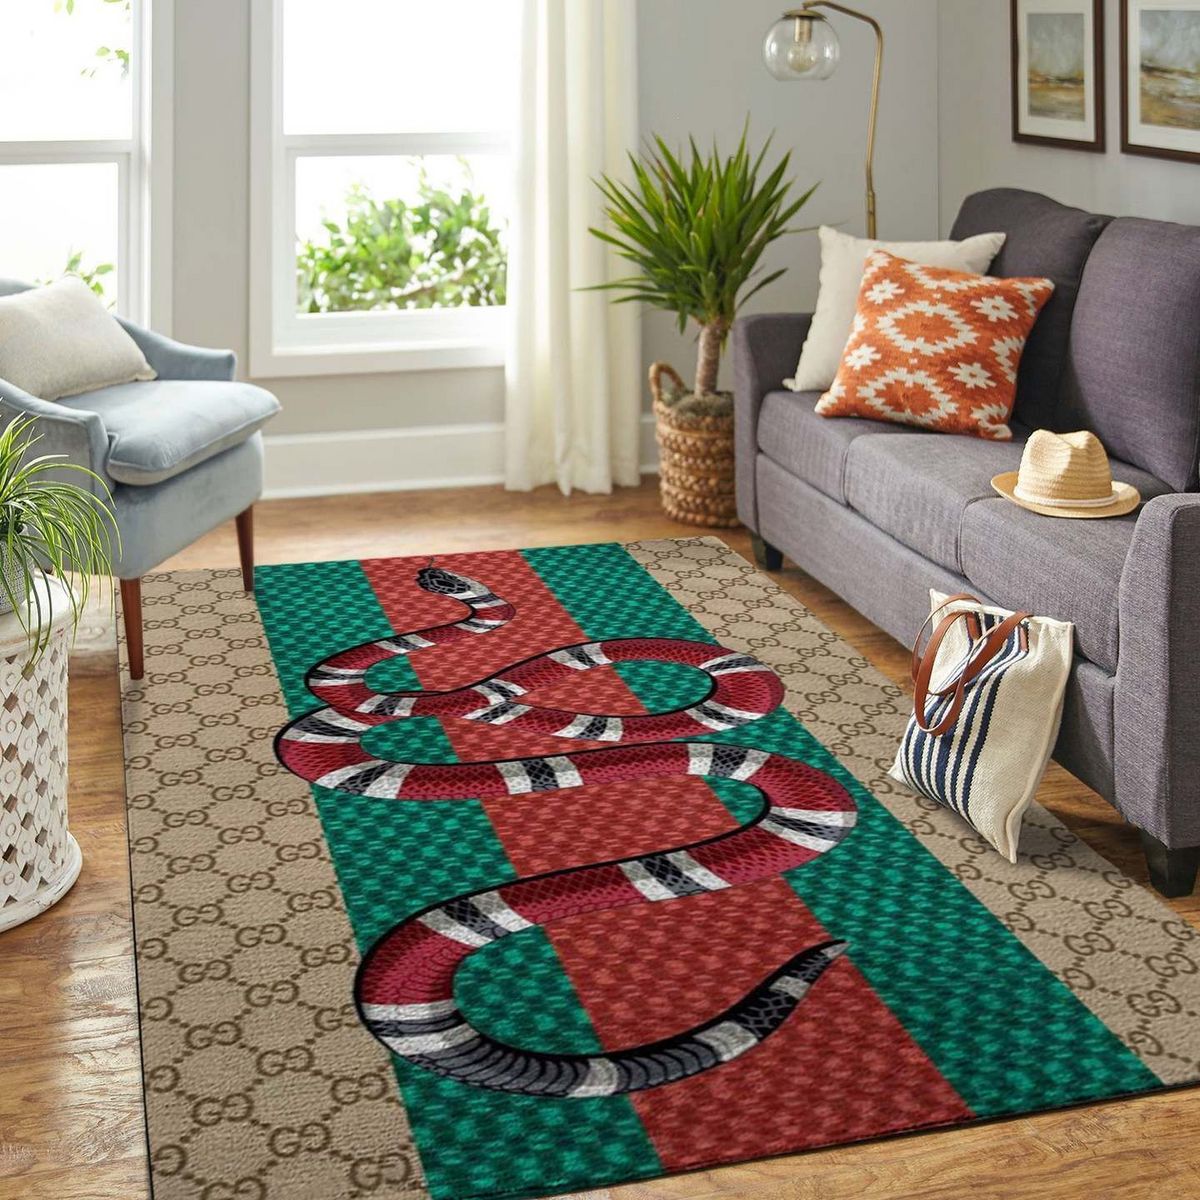 Gucci Snake Red Green Luxury Brand Carpet Rug Limited Edition